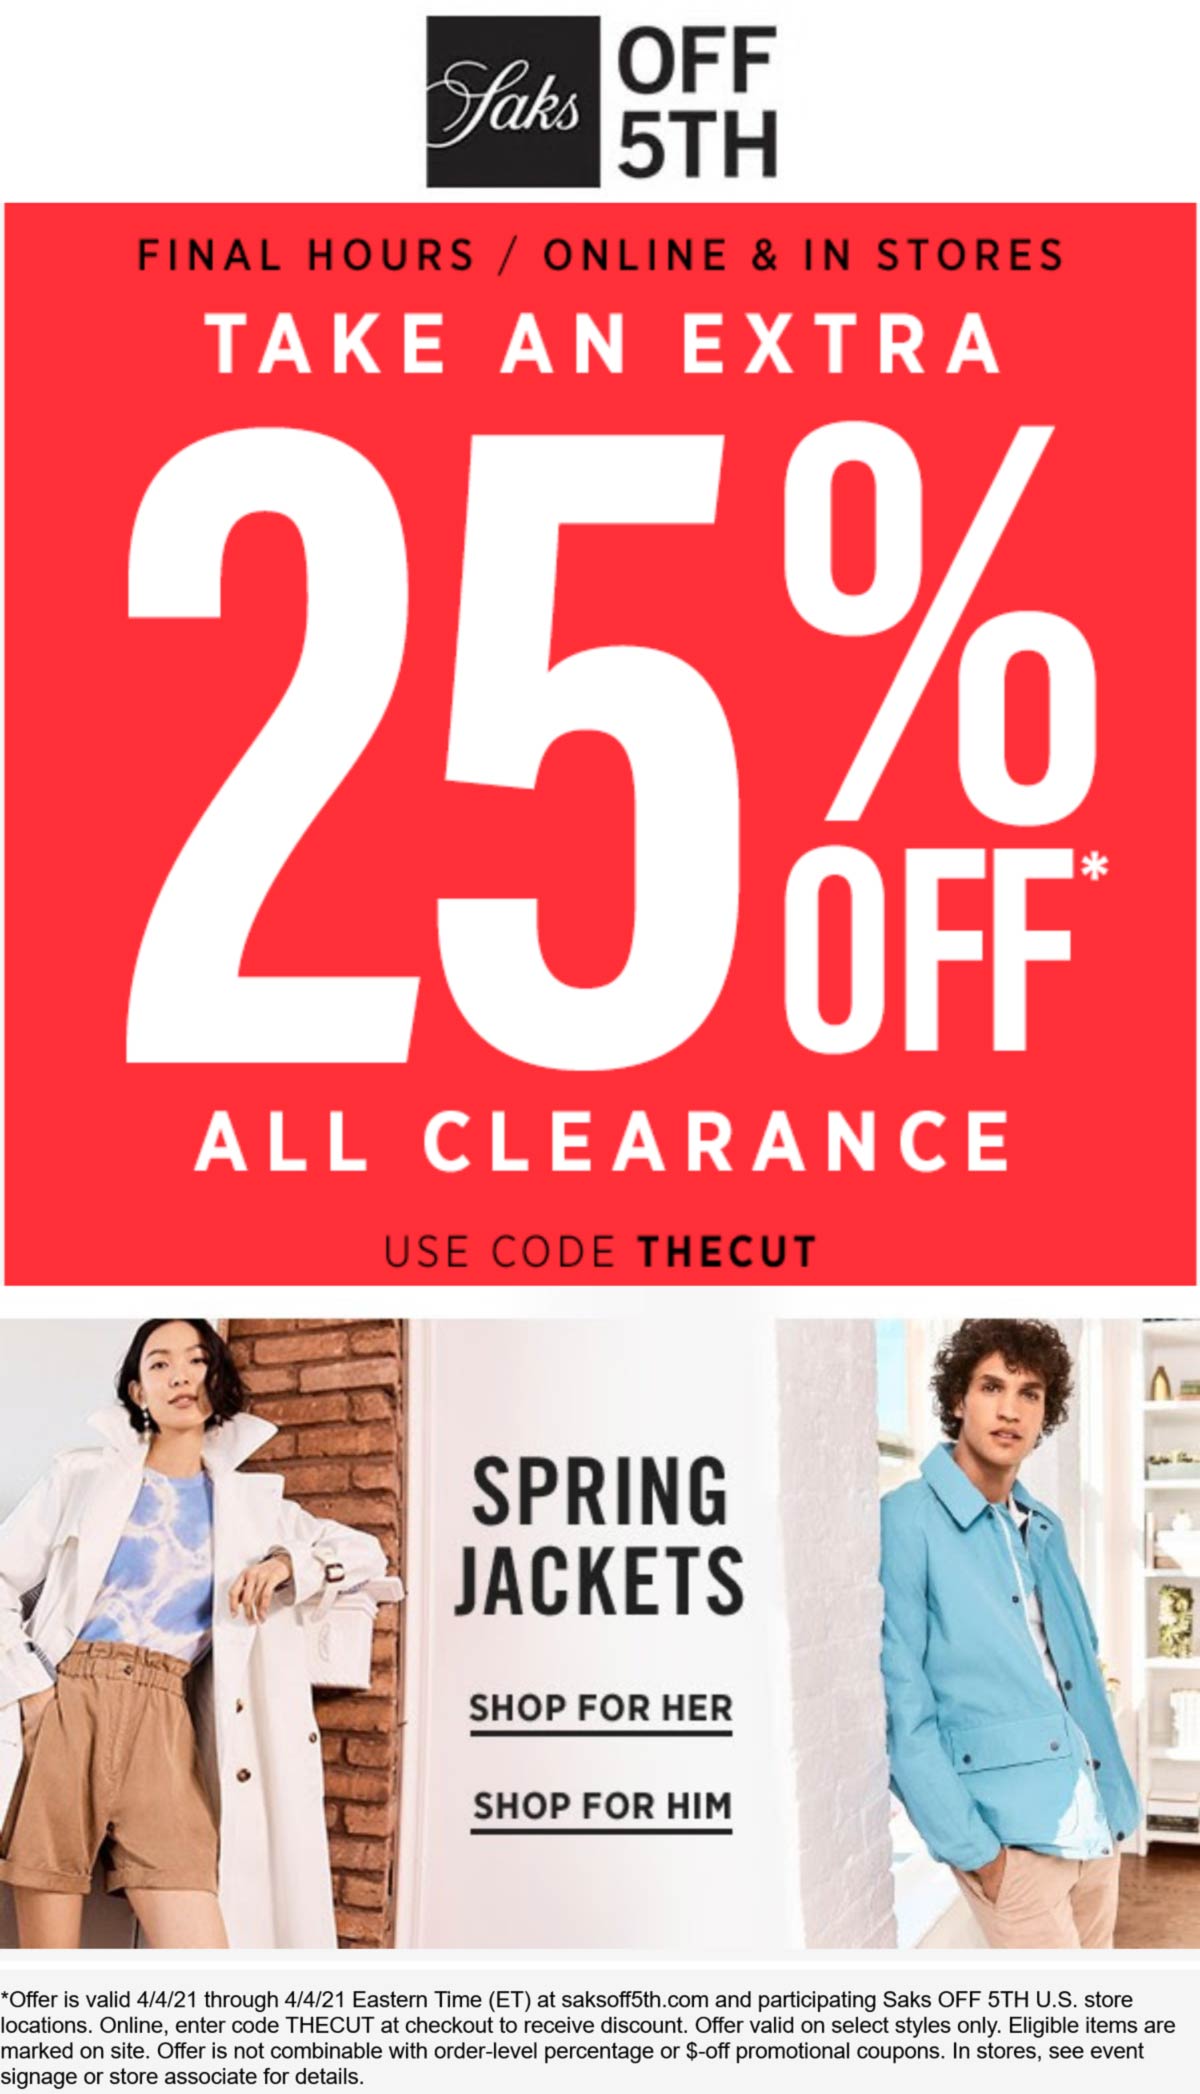 extra-25-off-clearance-today-at-saks-off-5th-or-online-via-promo-code